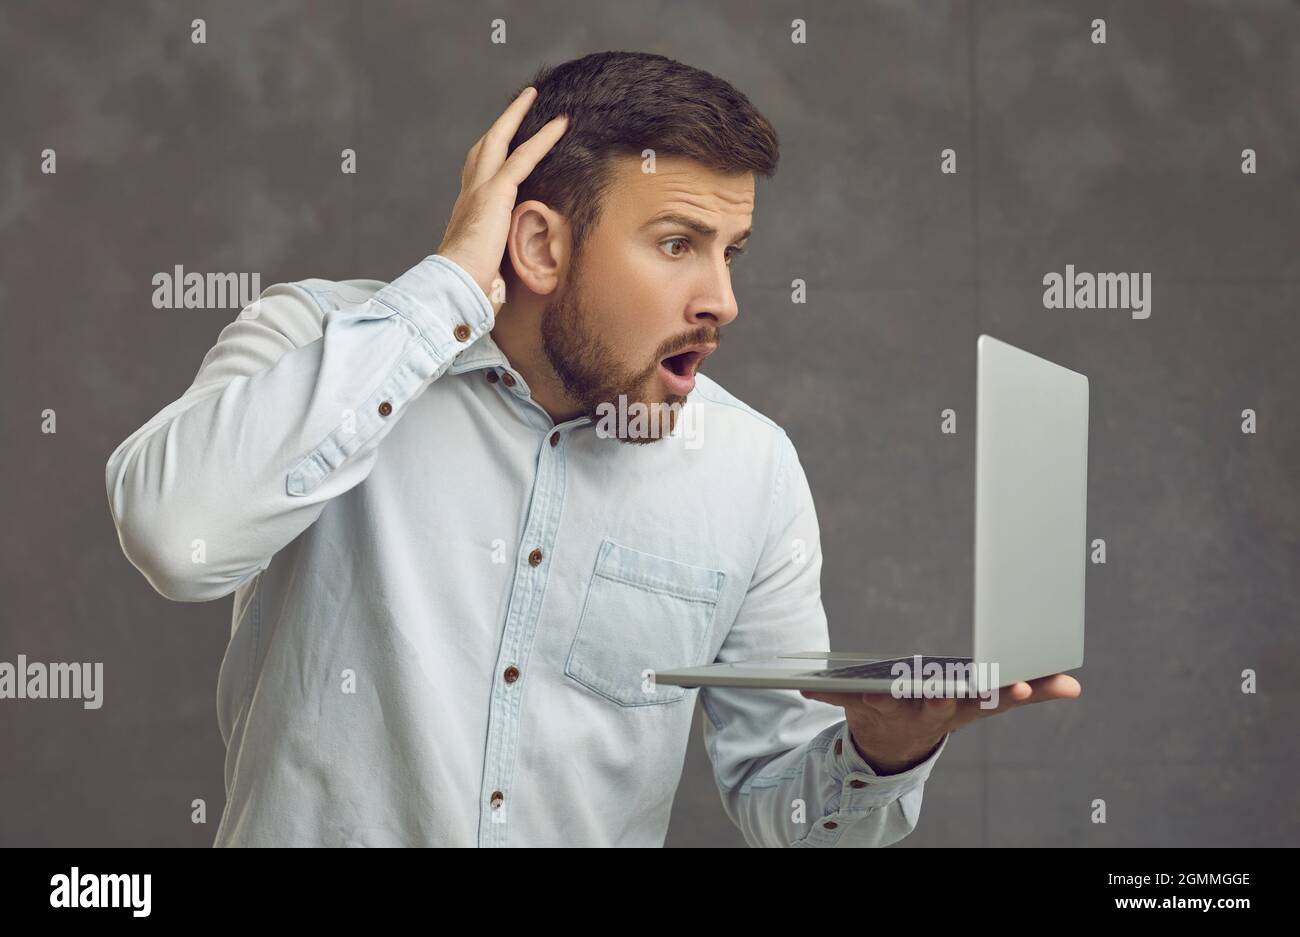 Shocked young man looking at screen of laptop computer that he's holding in hand Stock Photo